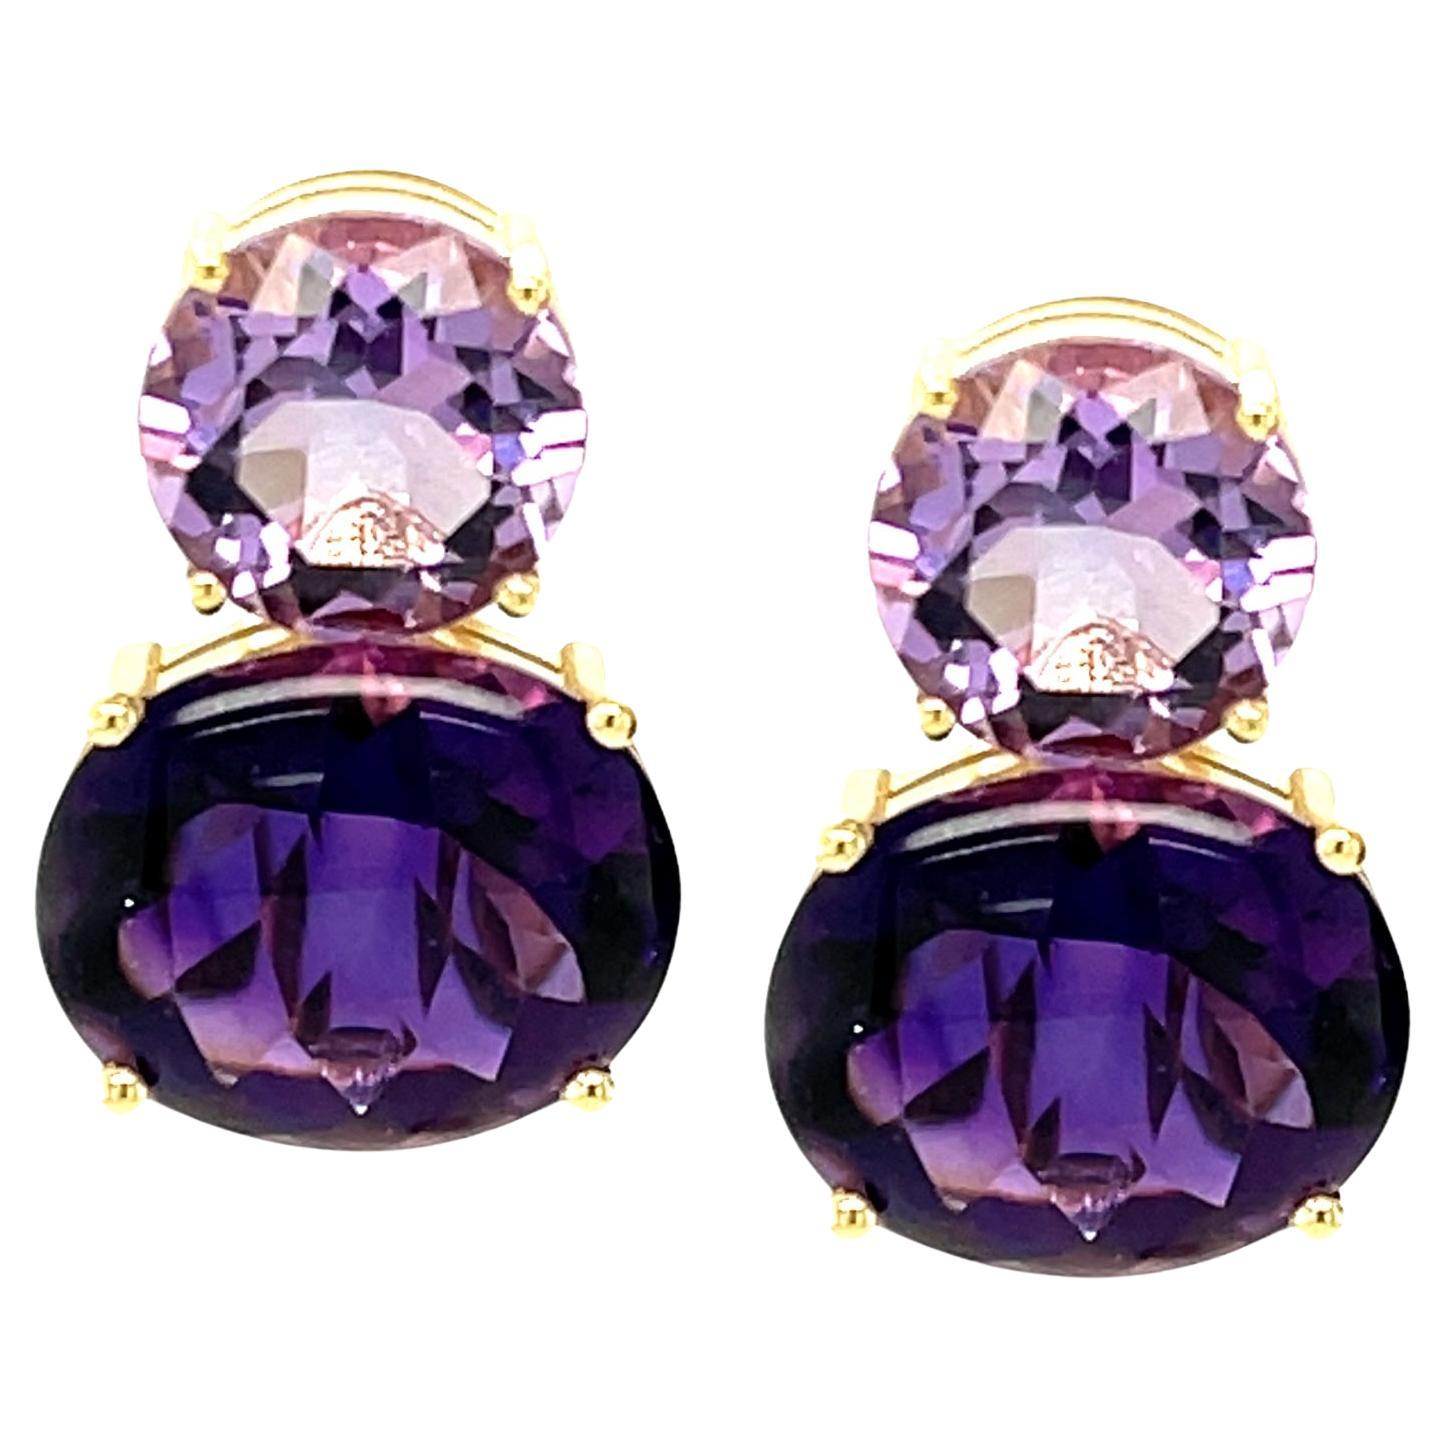 17.17 Carats Total Amethyst Earrings in Yellow Gold with Omega French Clips